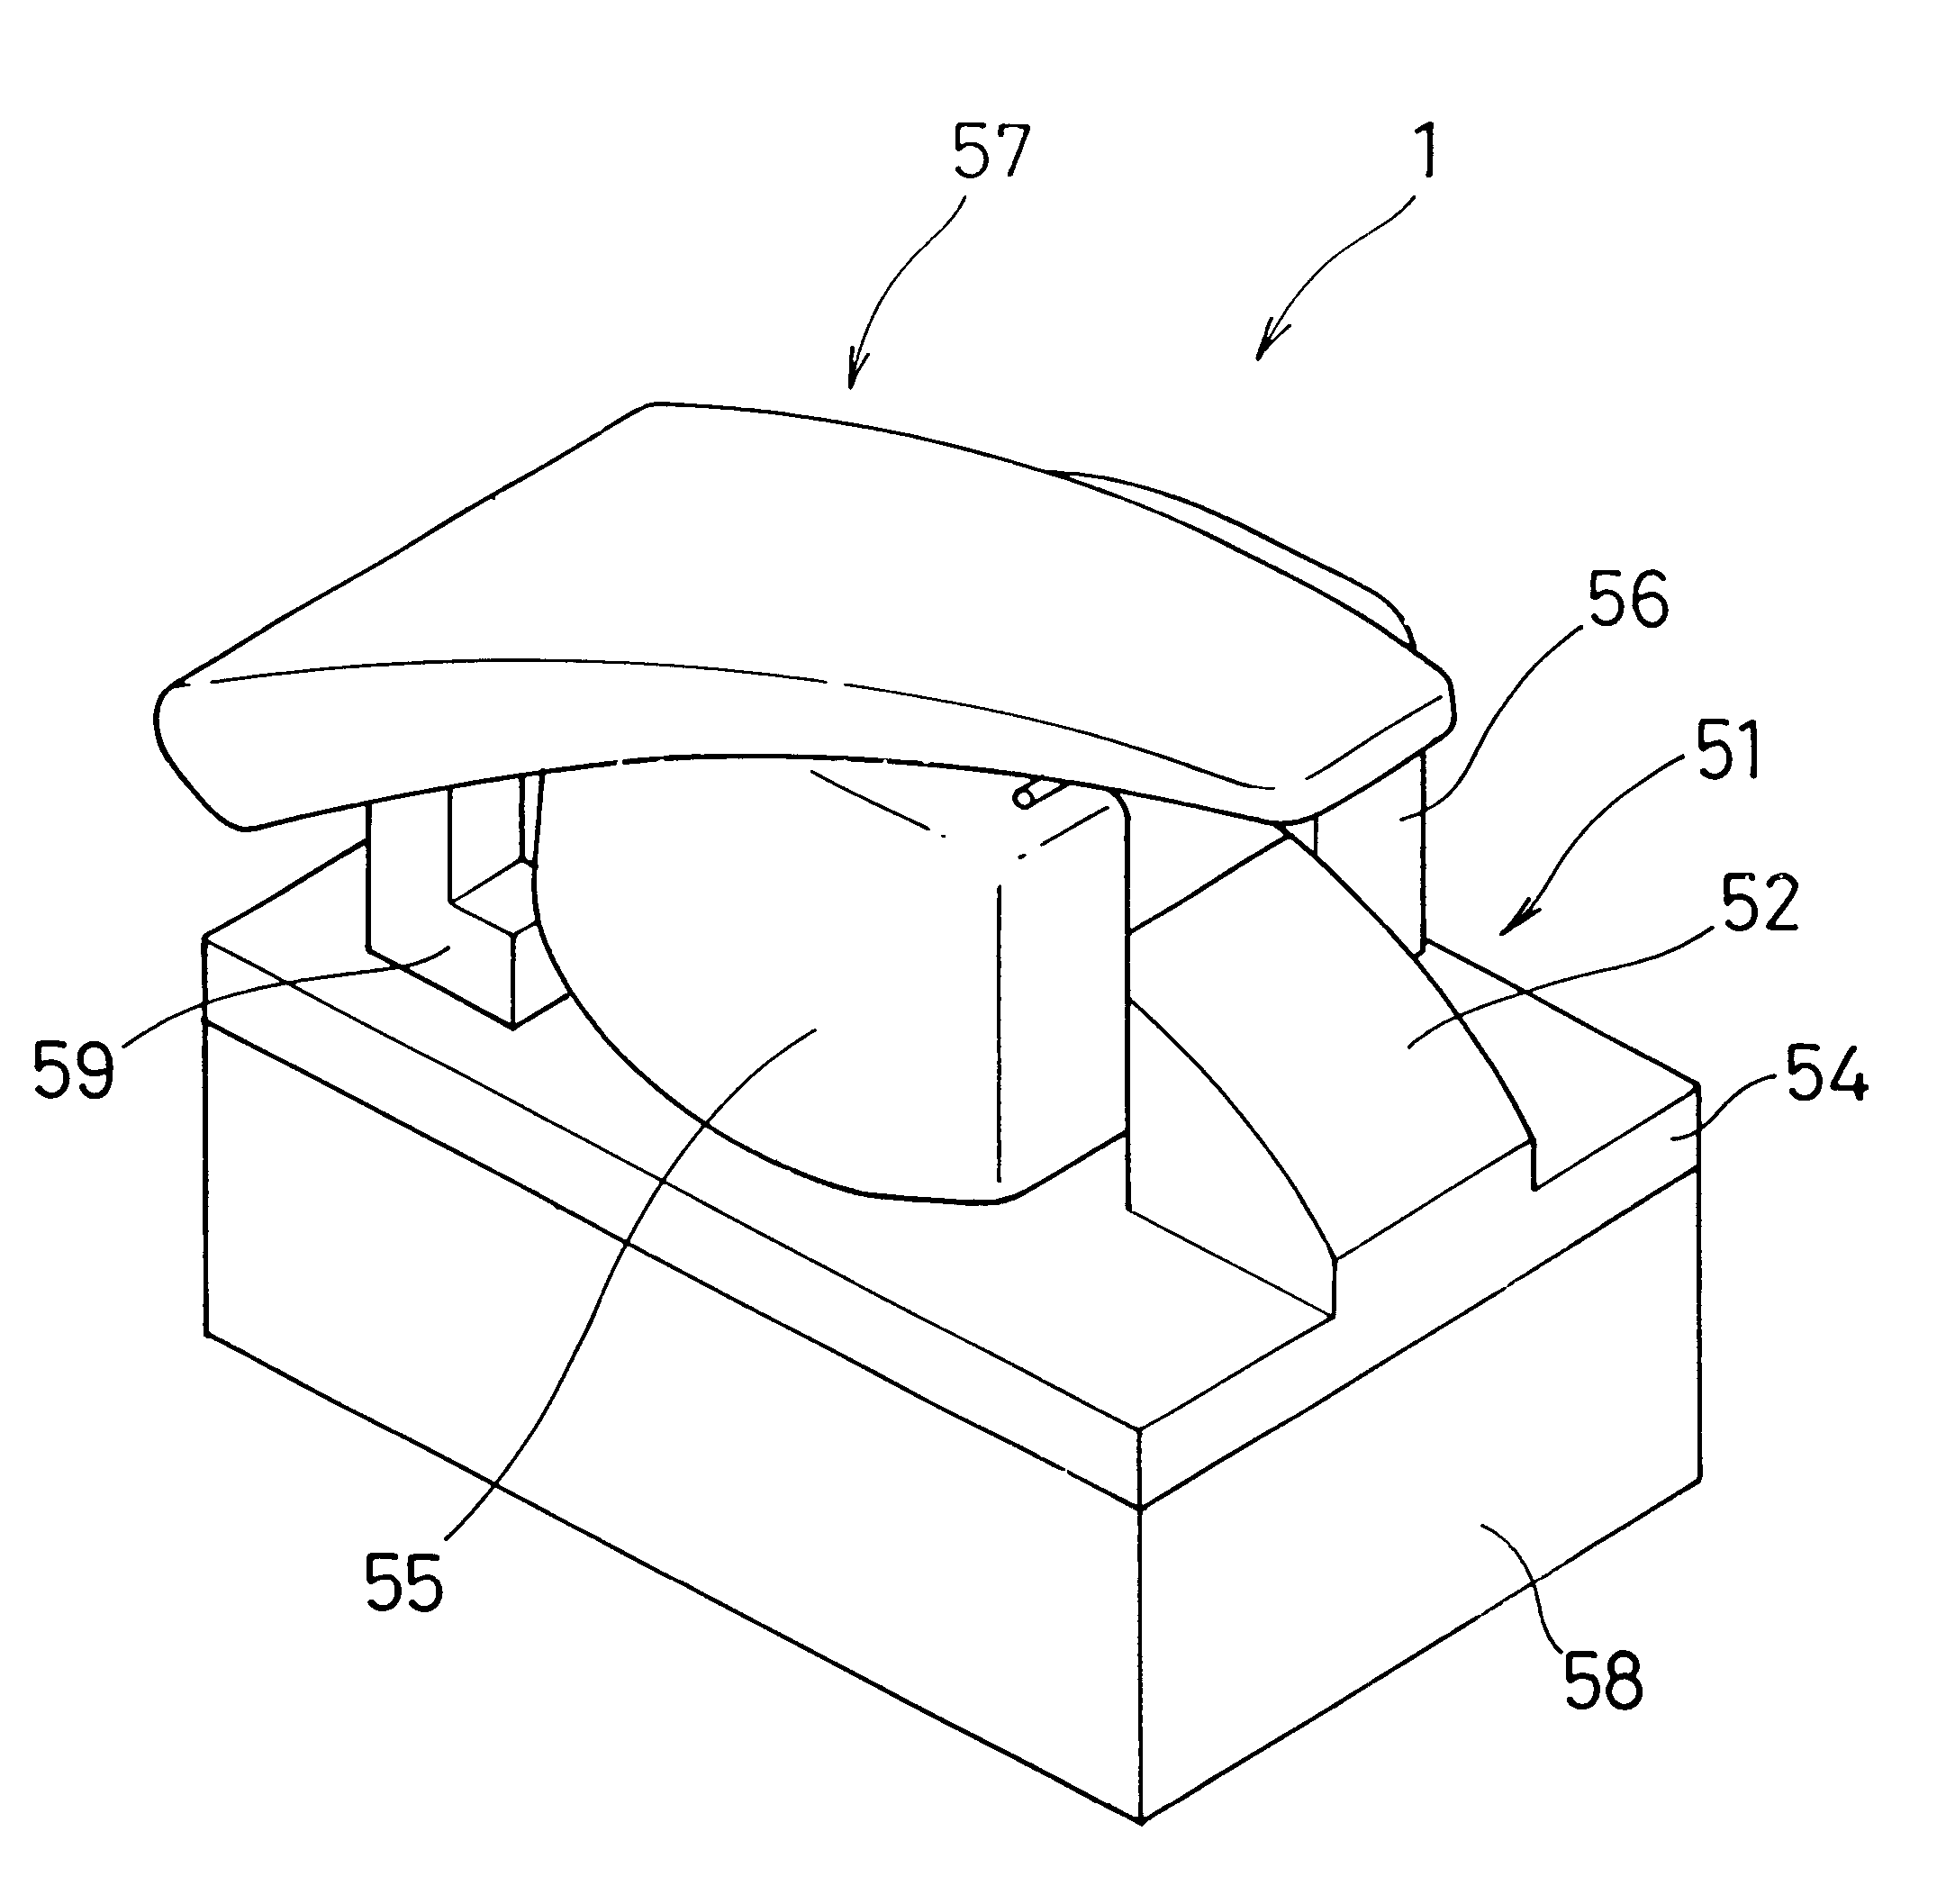 Living body inspecting apparatus and noninvasive blood analyzer using the same